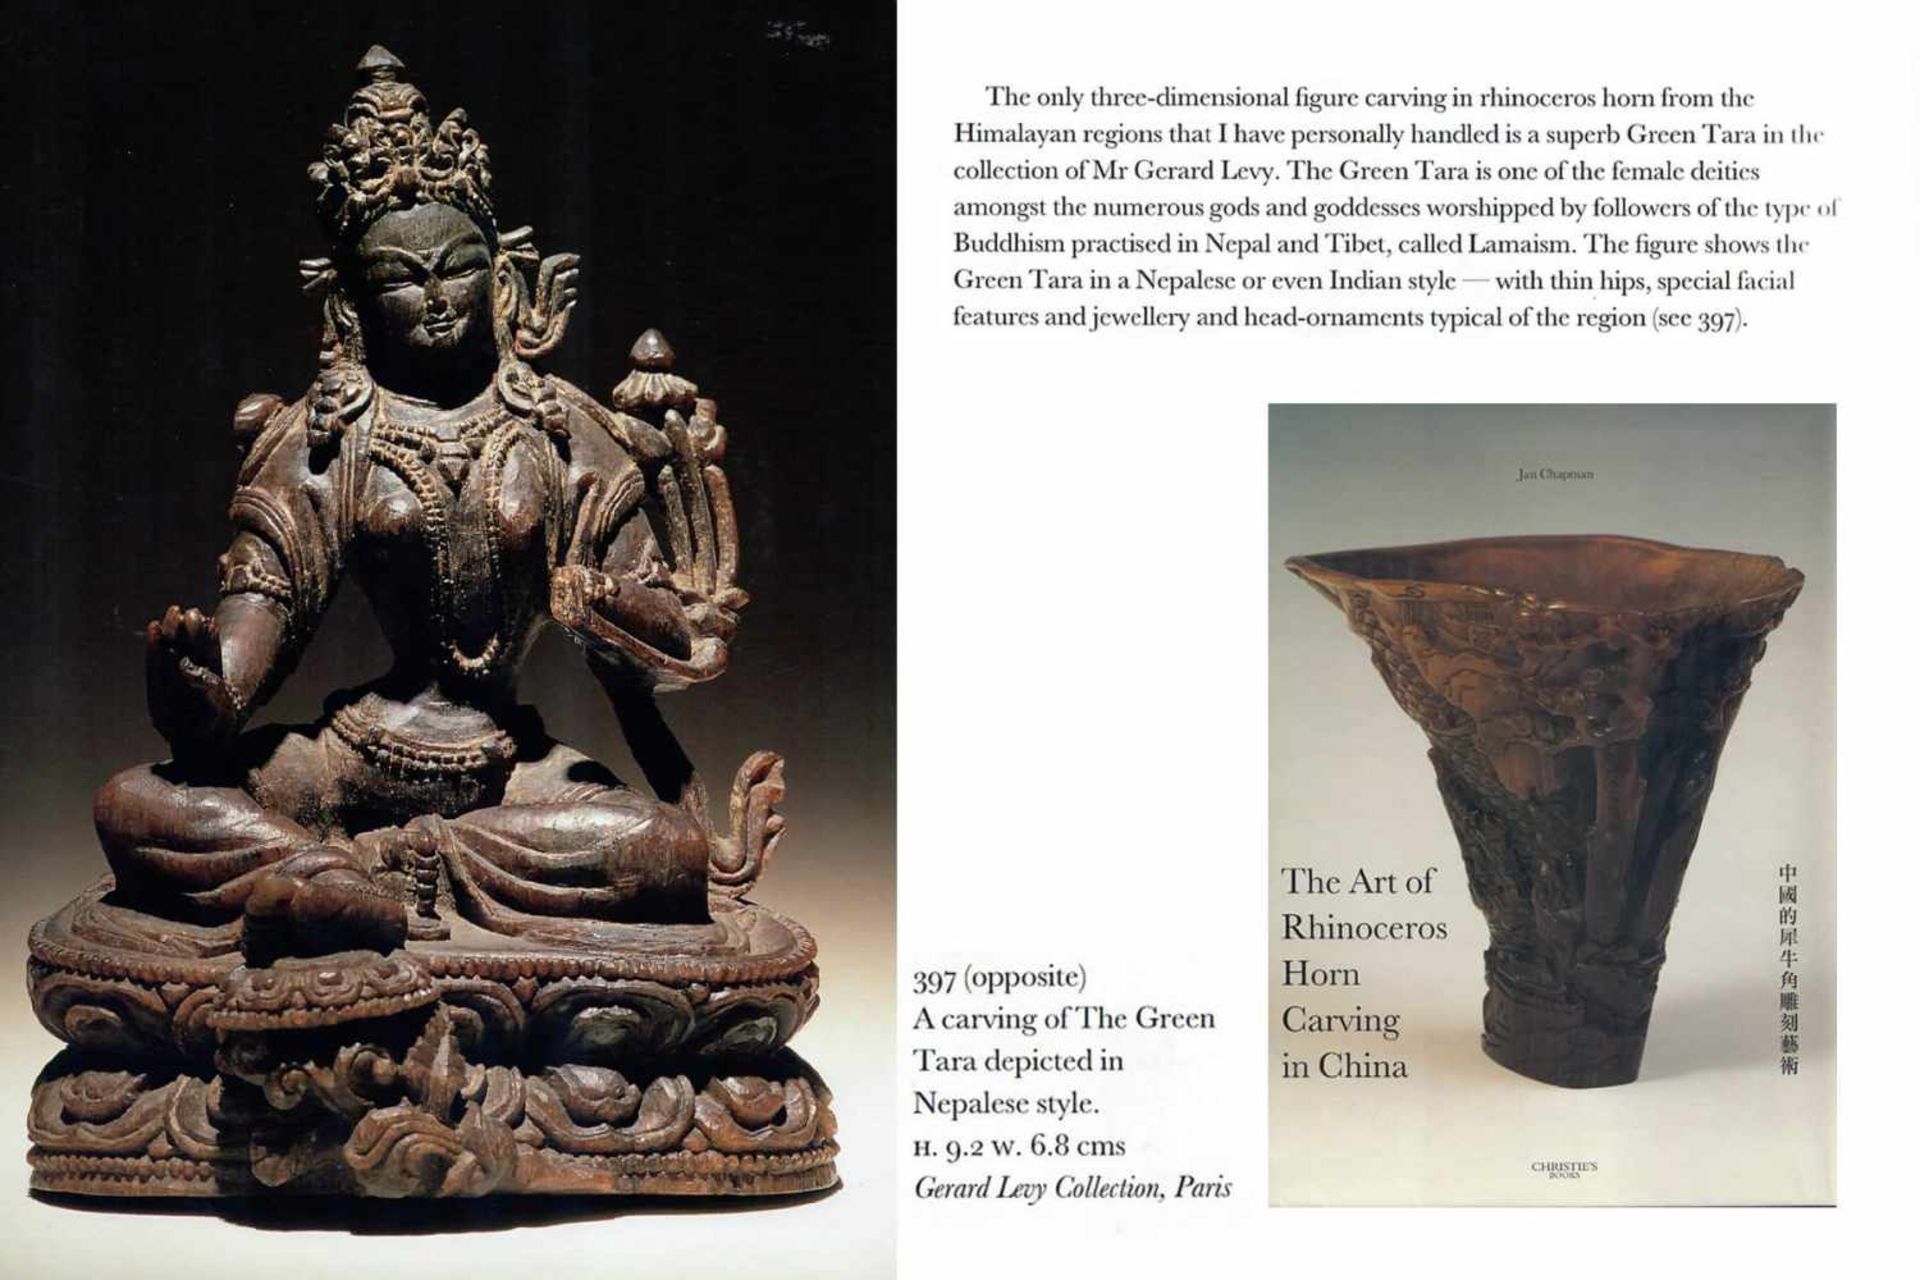 AN EXTREMELY RARE 17th CENTURY RHINOCEROS HORN CARVING OF A GREEN TARA This lot is published and - Bild 7 aus 8